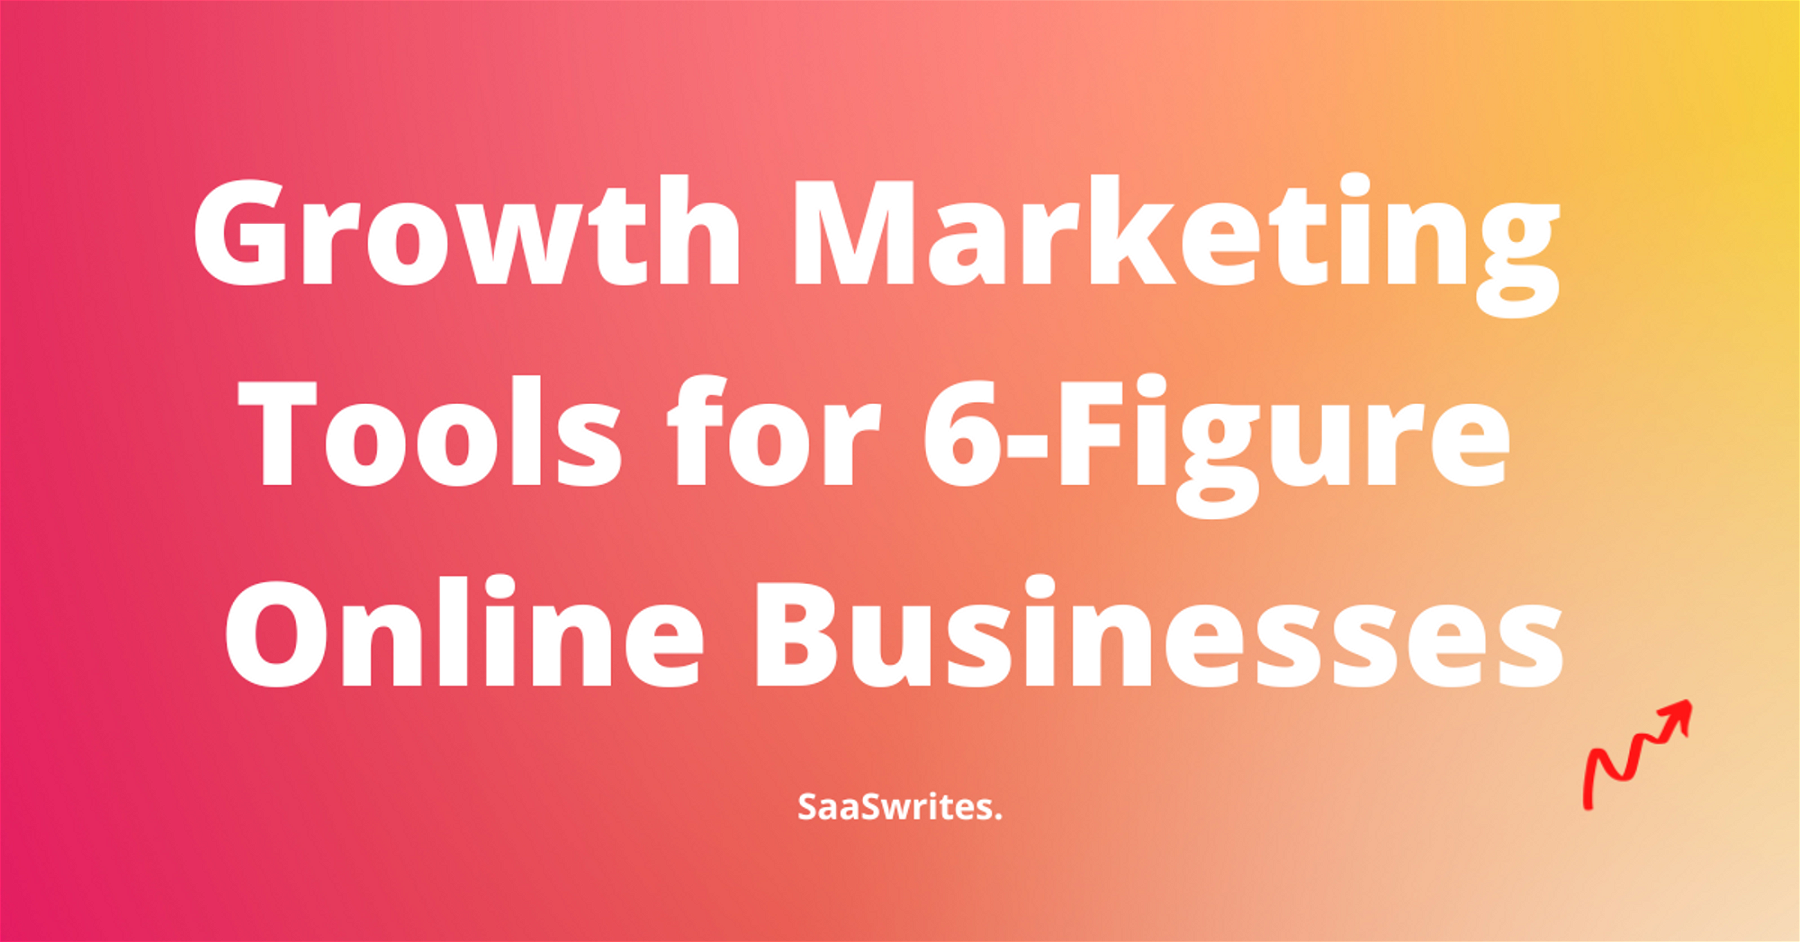 21 Marketing Tools for Growth to Run a 6-figure Online Business in 2023!